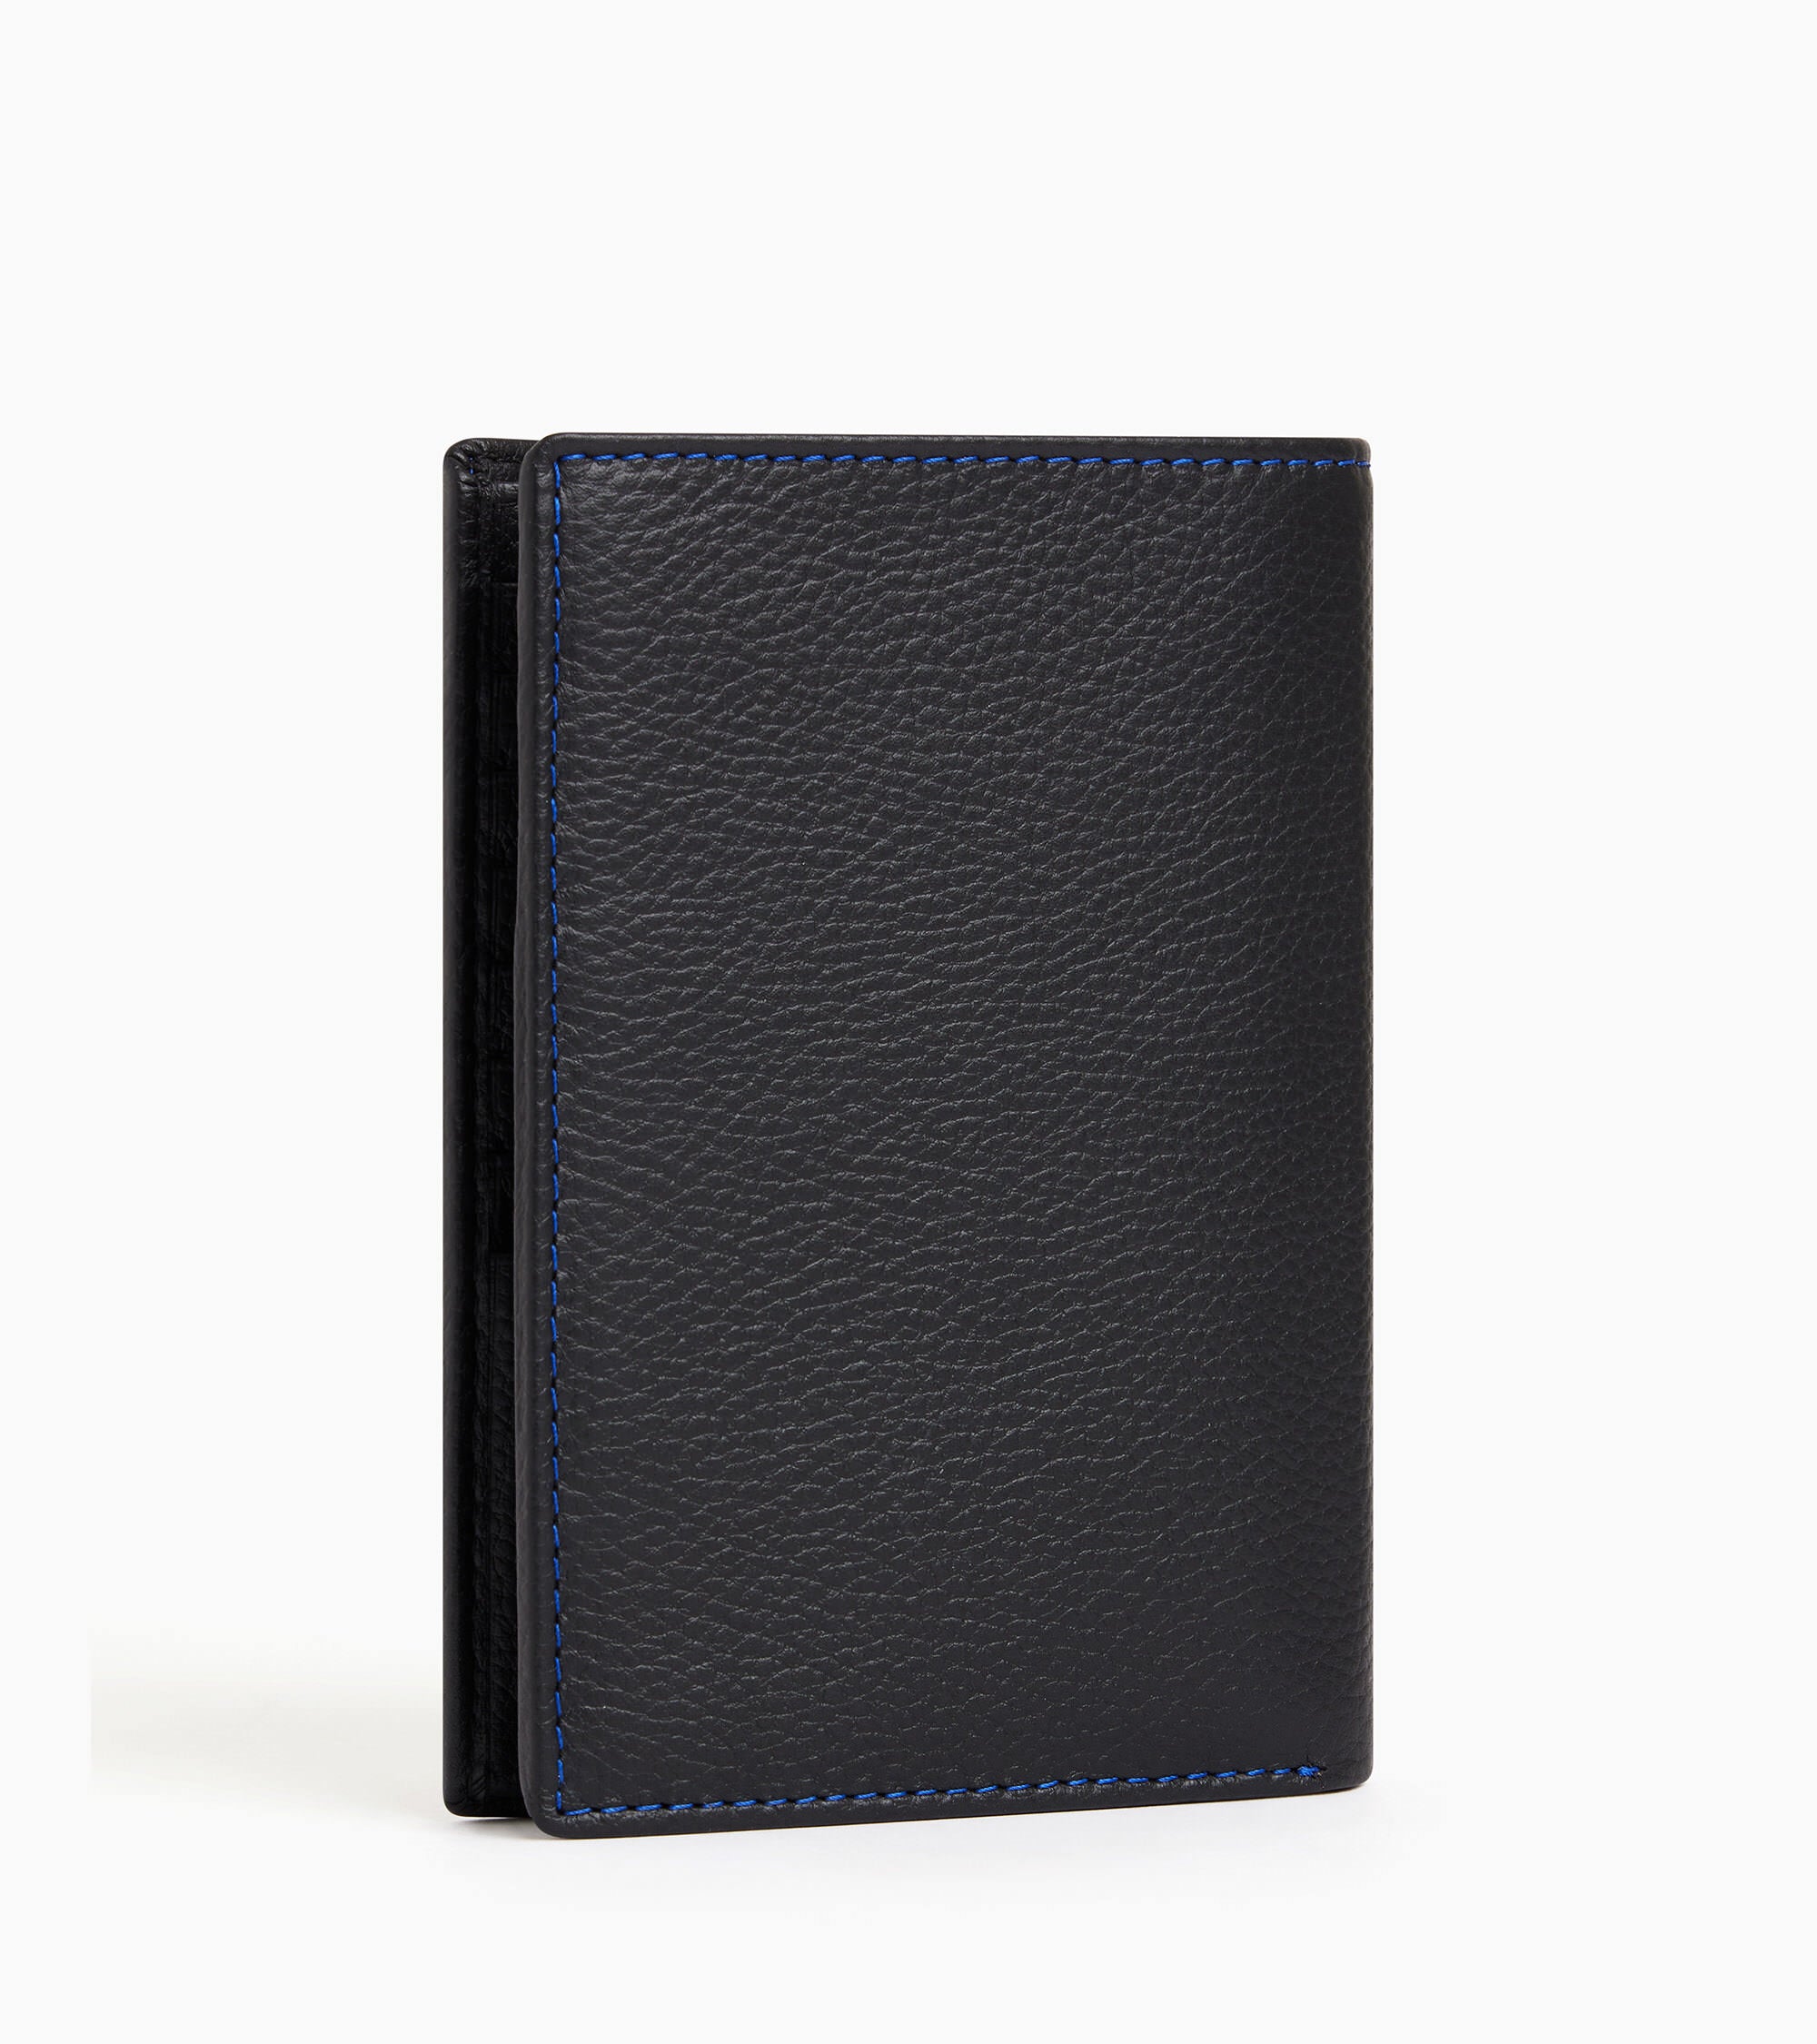 Charles large, vertical, zipped wallet with 2 gussets in grained leather